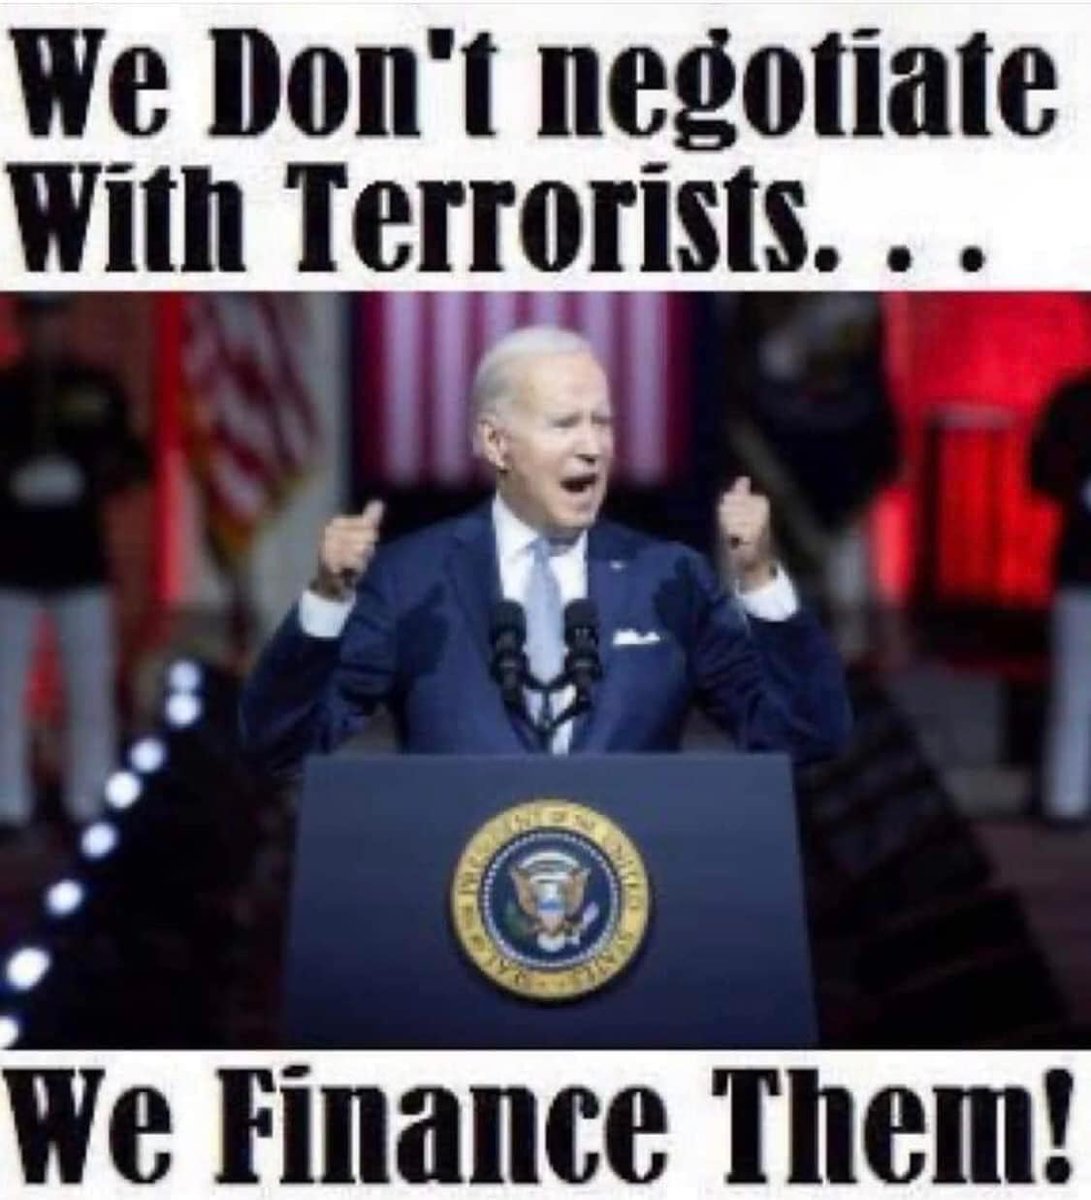 @ScottPresler @amundazaGT NEVER SHOULD HAVE HAPPENED! Biden & Obama policies gave $Billions to Iran world’s biggest sponsor of terrorism allowing them to fund attacks like this on Israel. Biden’s Secretary of State Blinken:”Iran has unfortunately always used and focused its funds on supporting terrorism.”